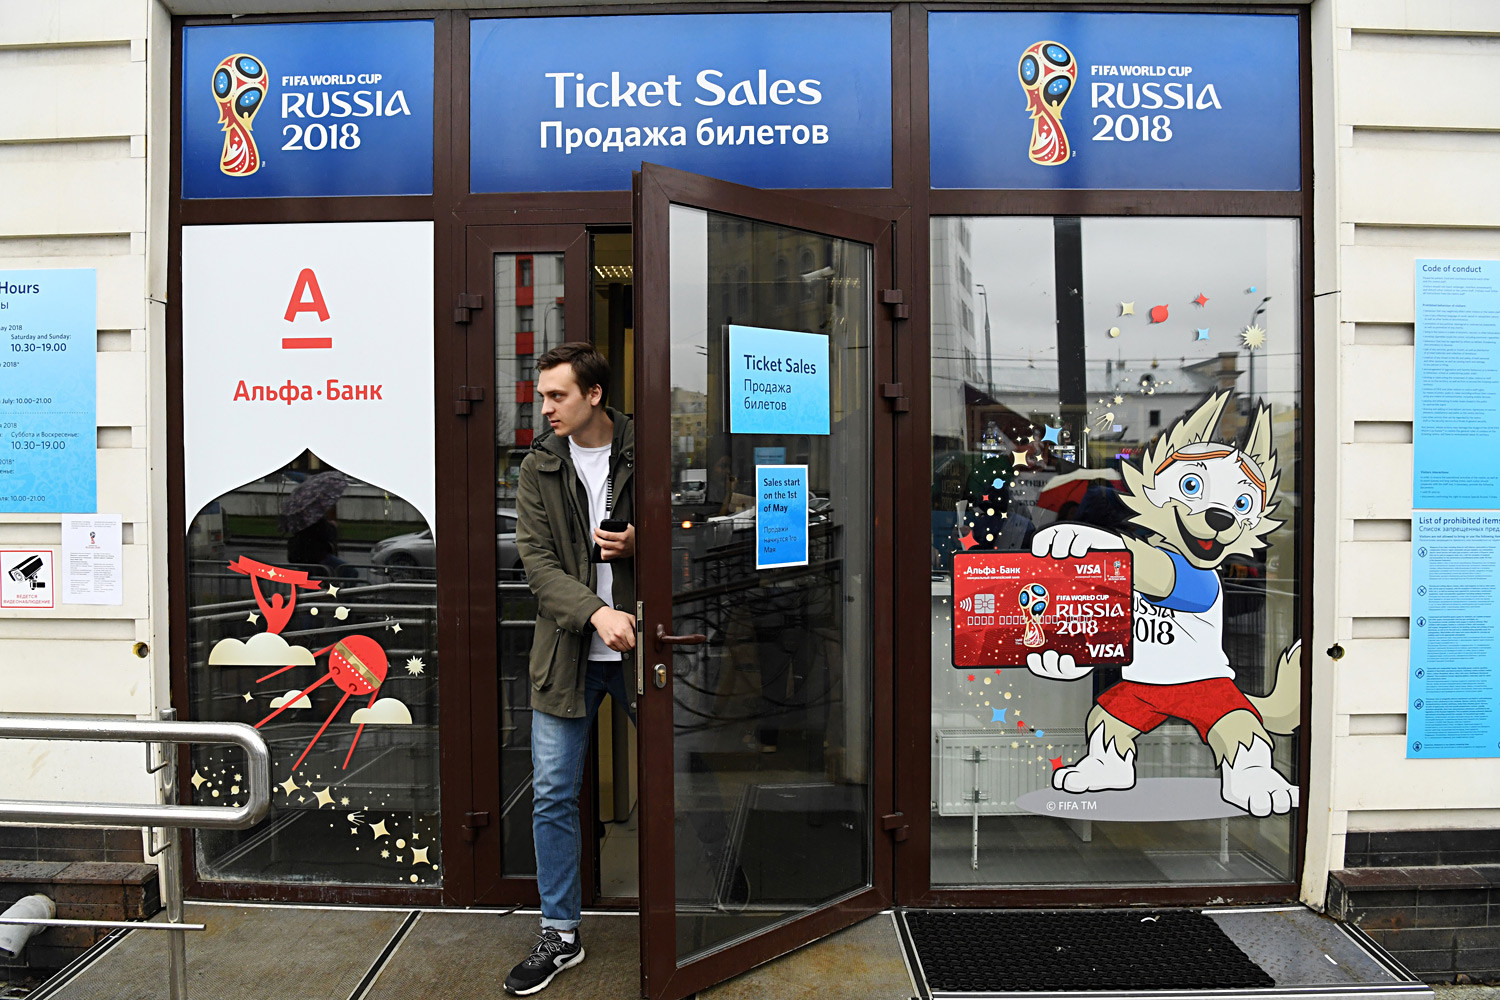 WORLDCUP Russia how to buy ticket 2018. Tickets russia